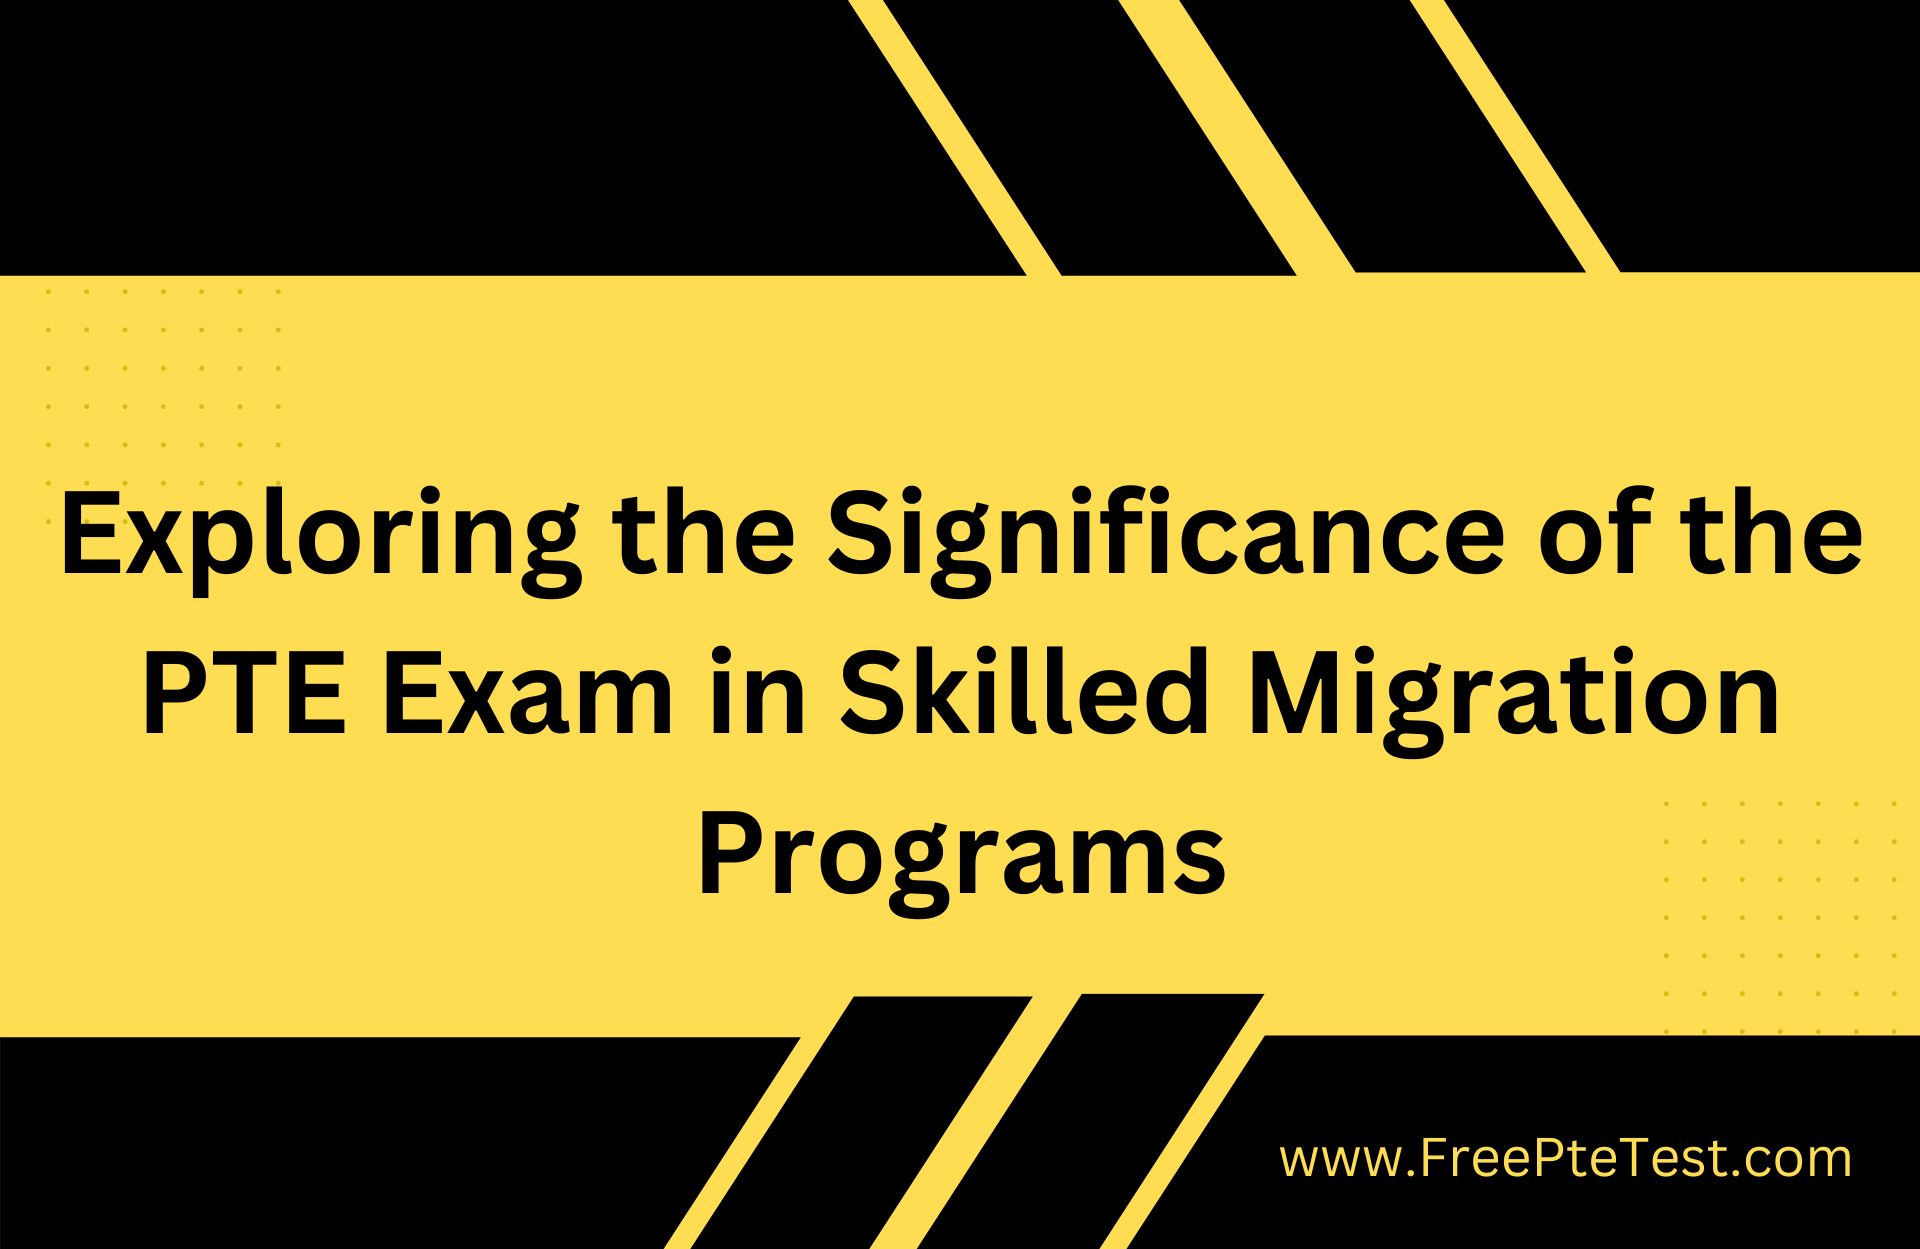 You are currently viewing Exploring the Significance of the PTE Exam in Skilled Migration